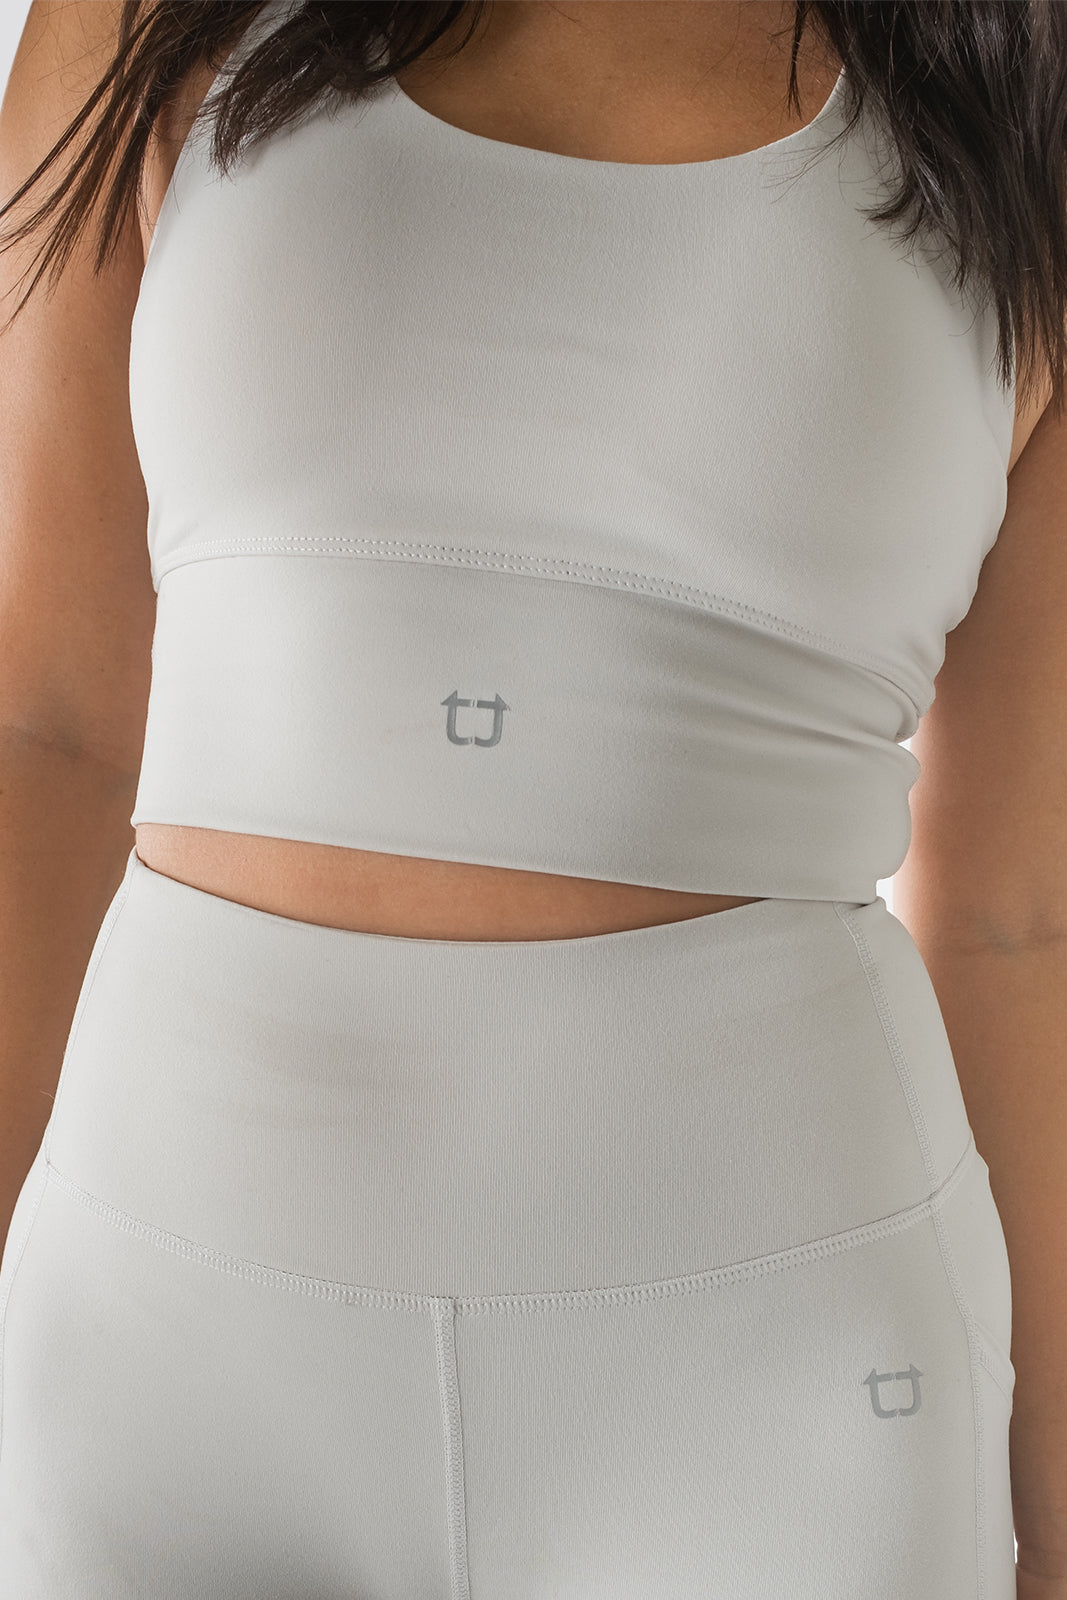 Vibe X V2 Supportive Cropped Tank - Arctic White